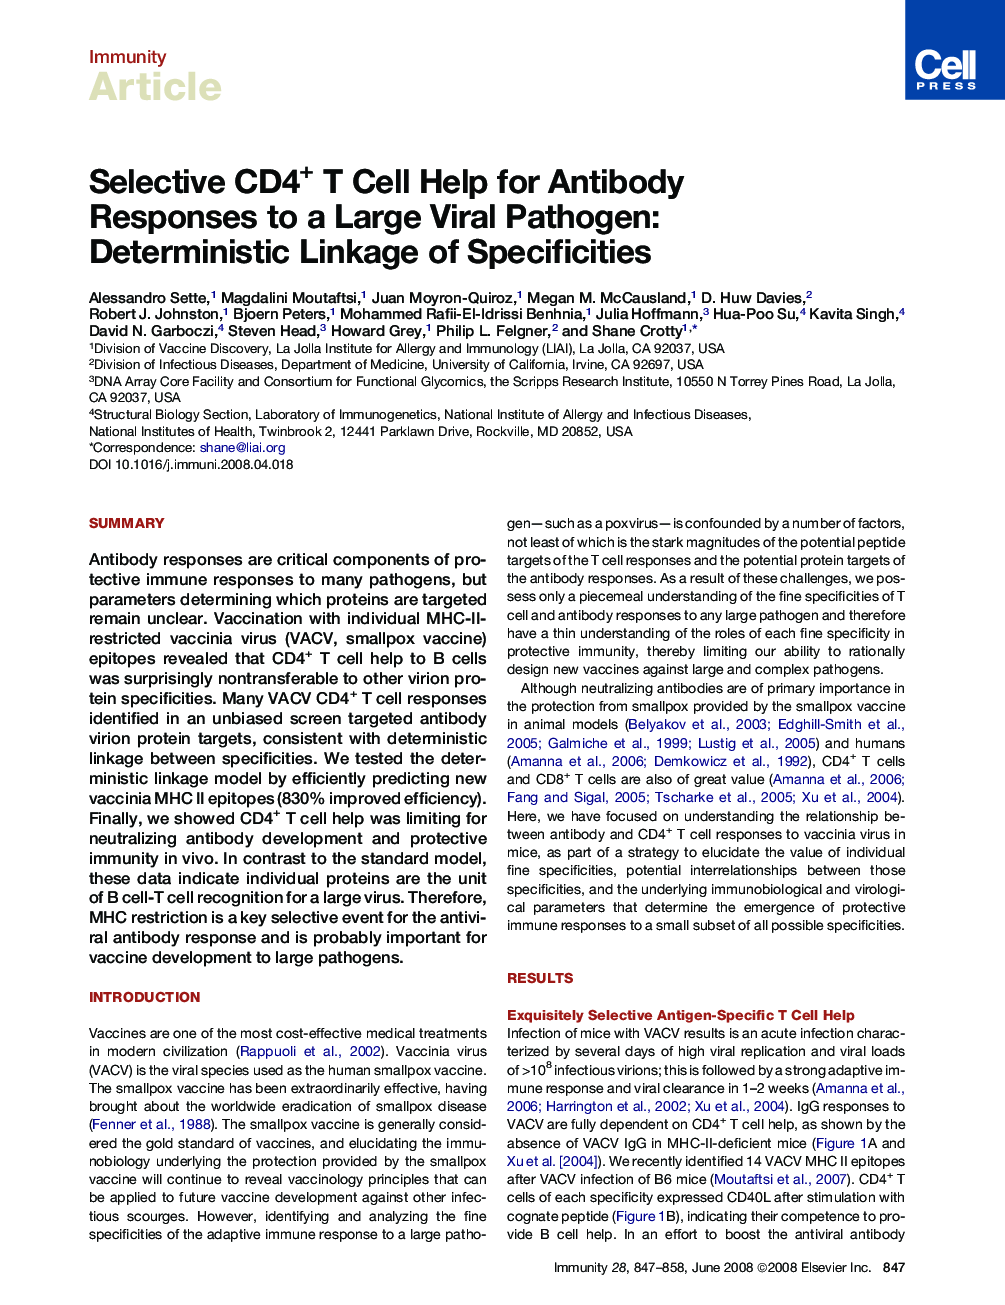 Selective CD4+ T Cell Help for Antibody Responses to a Large Viral Pathogen: Deterministic Linkage of Specificities